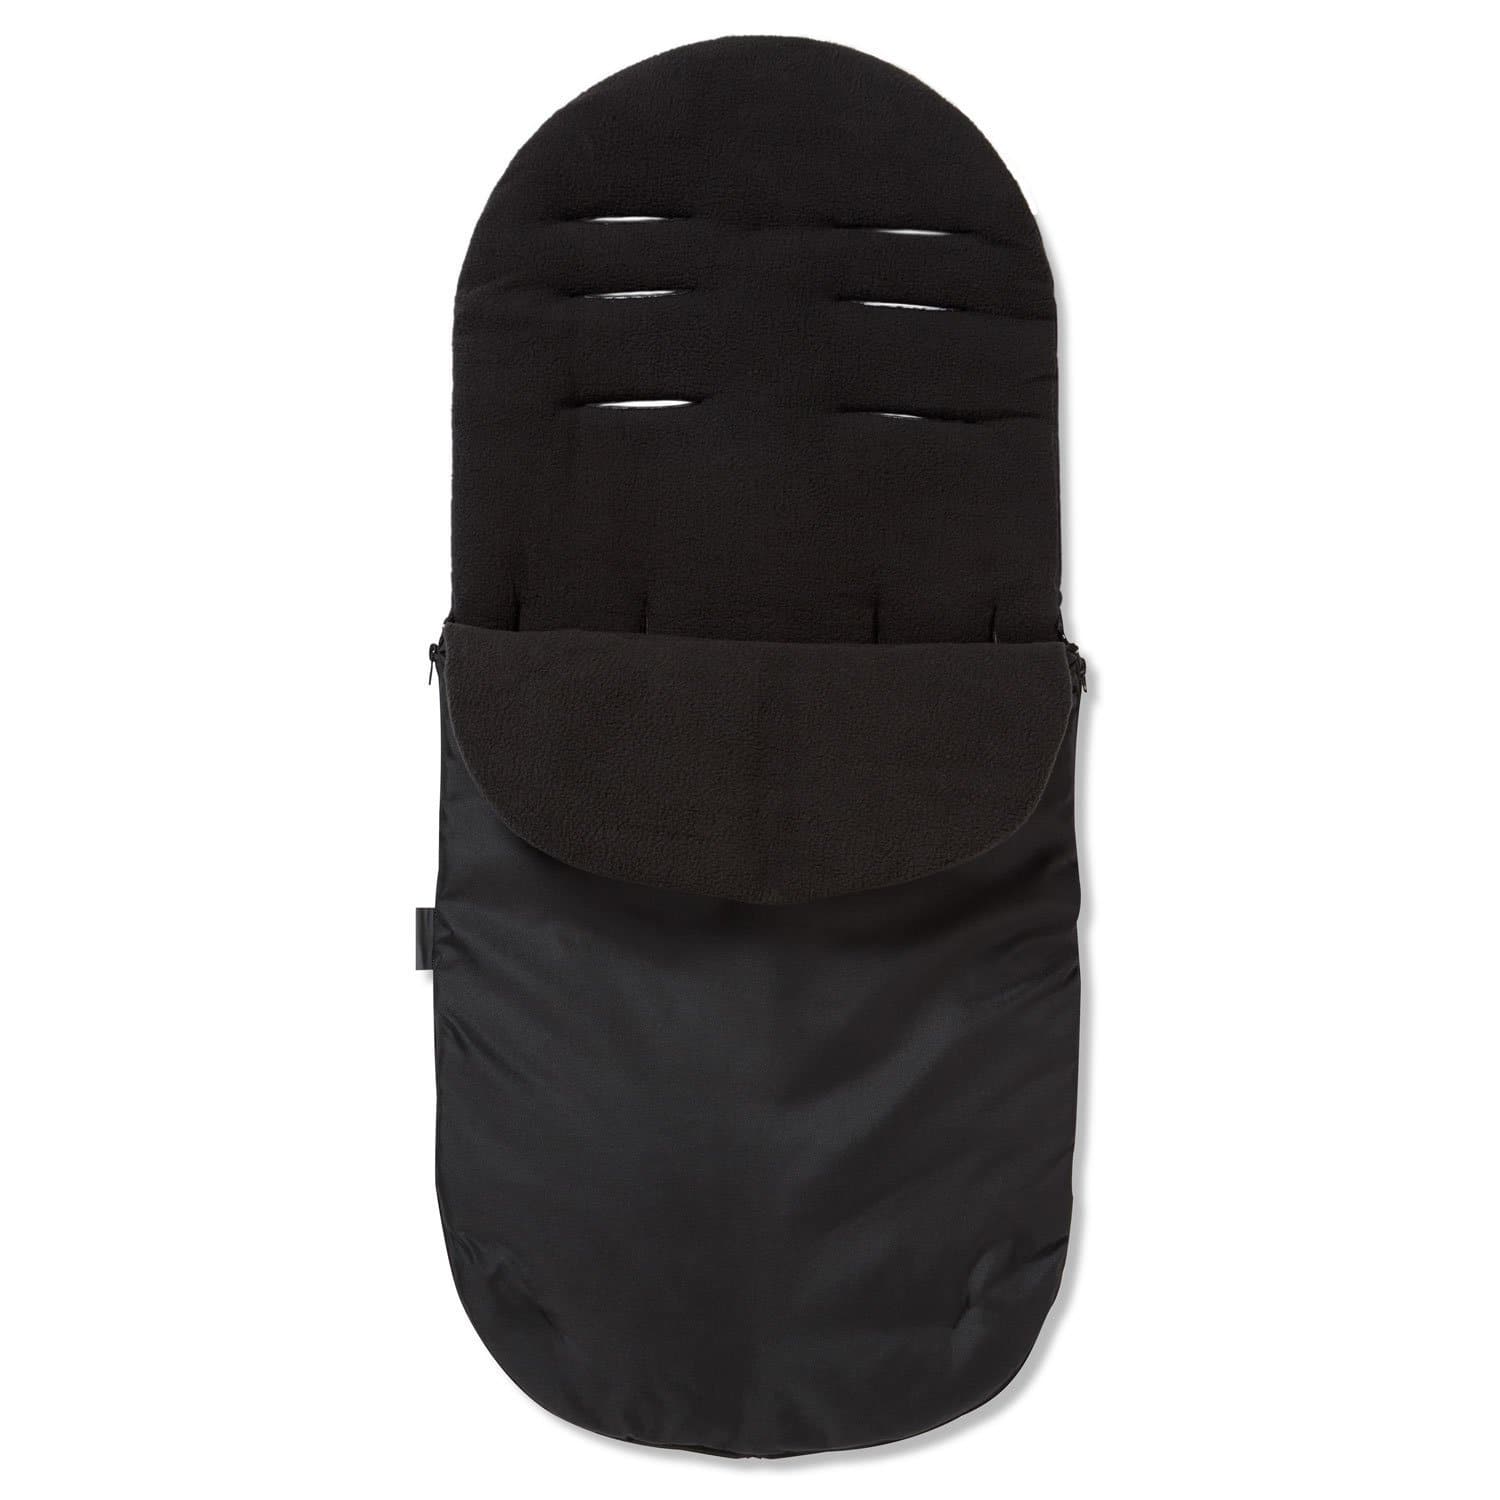 Footmuff / Cosy Toes Compatible with Maxi Cosi - Black / Fits All Models | For Your Little One